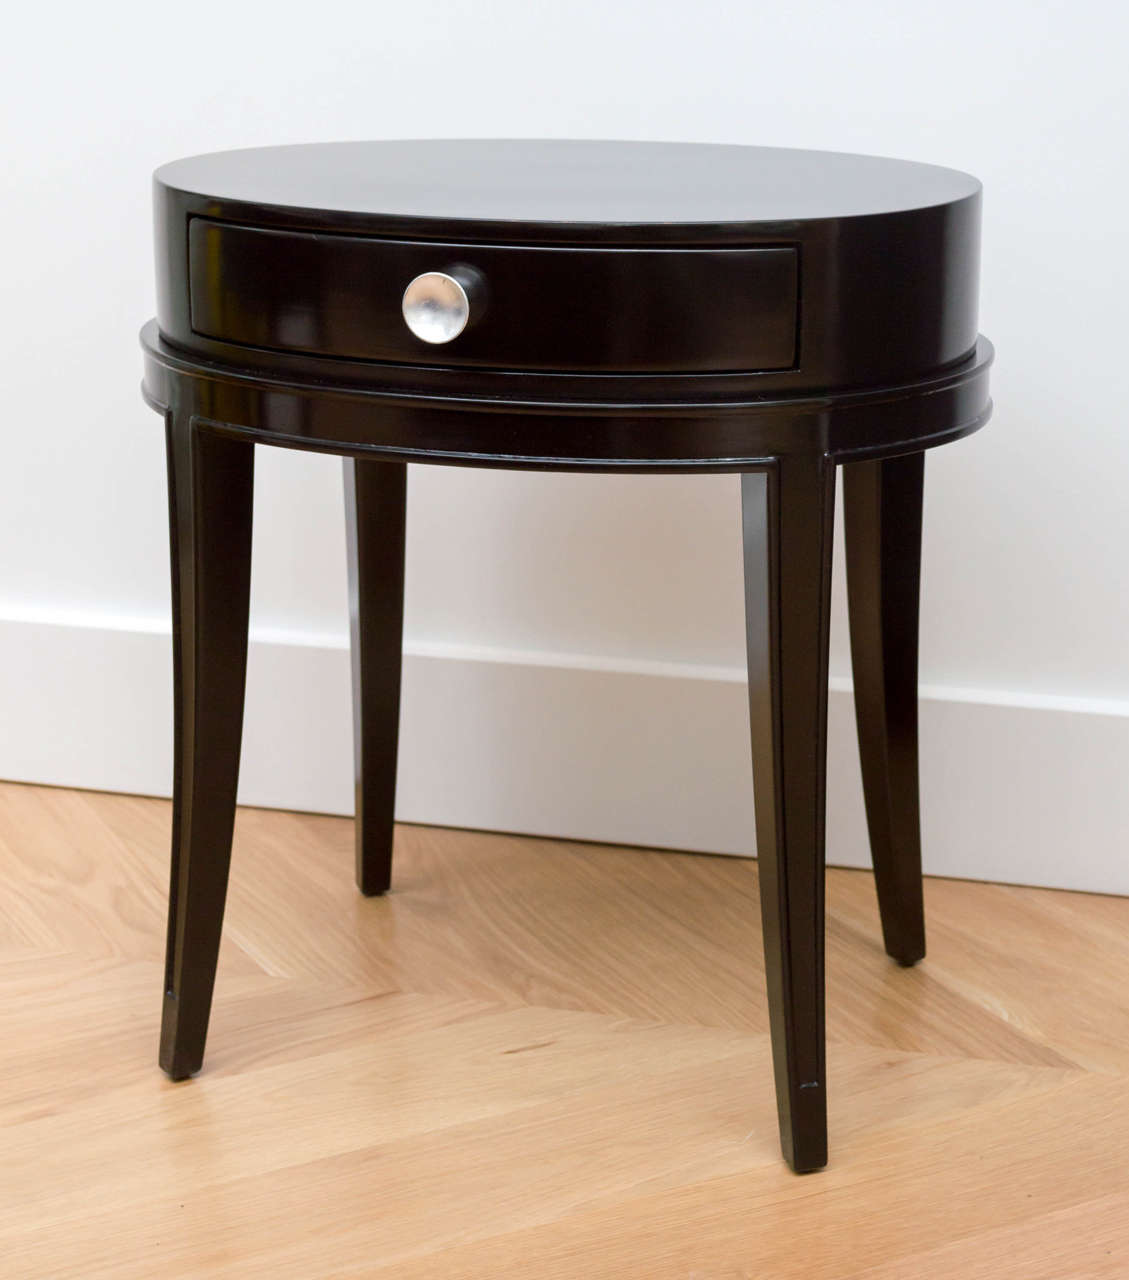 Mid-20th Century Pair of Lacquered Grosfeld House Tables